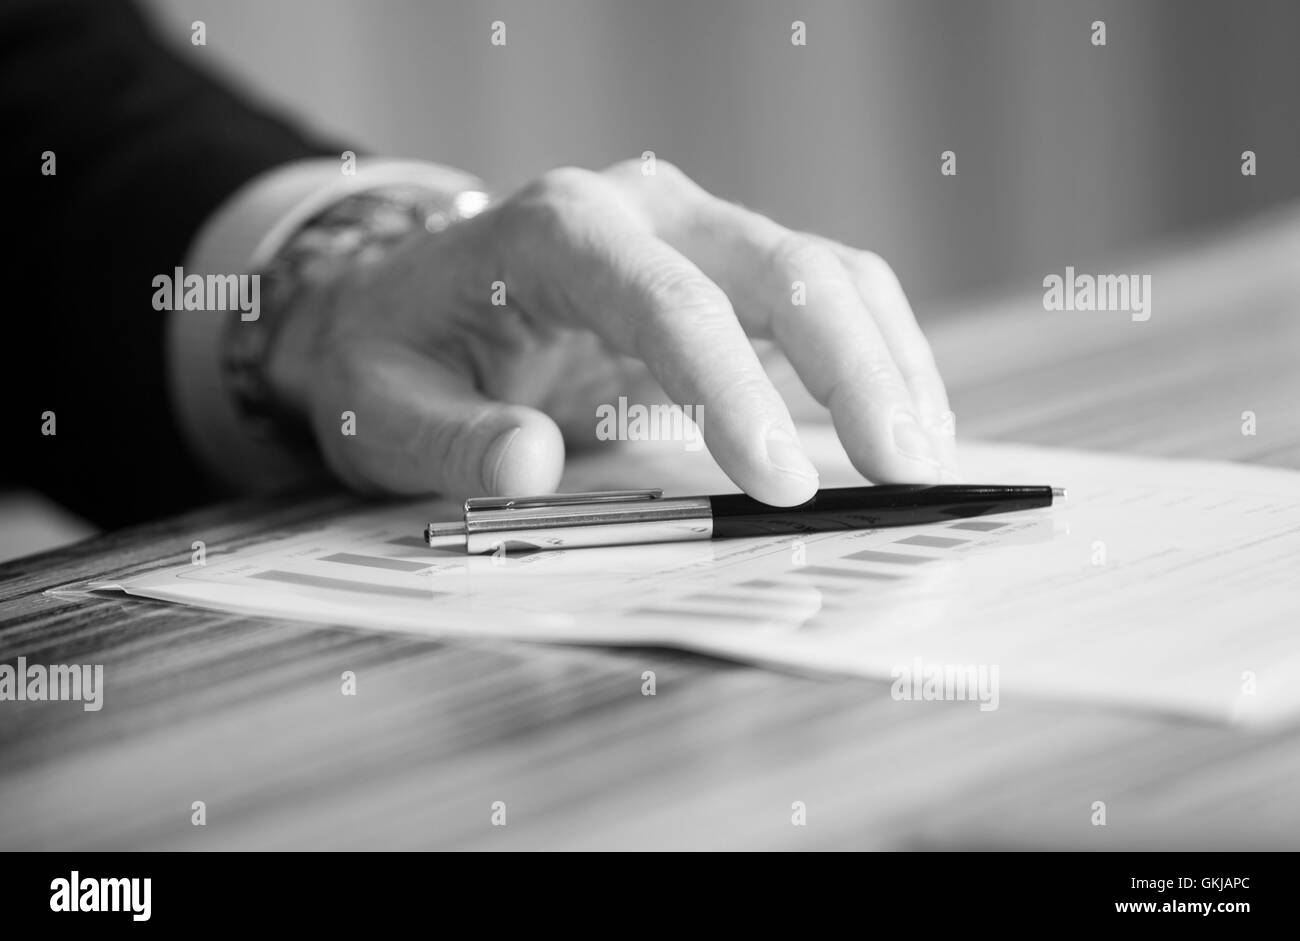 Man's hands holding a black pen in both arms in a thinking gesture during a meeting or negotiation Stock Photo